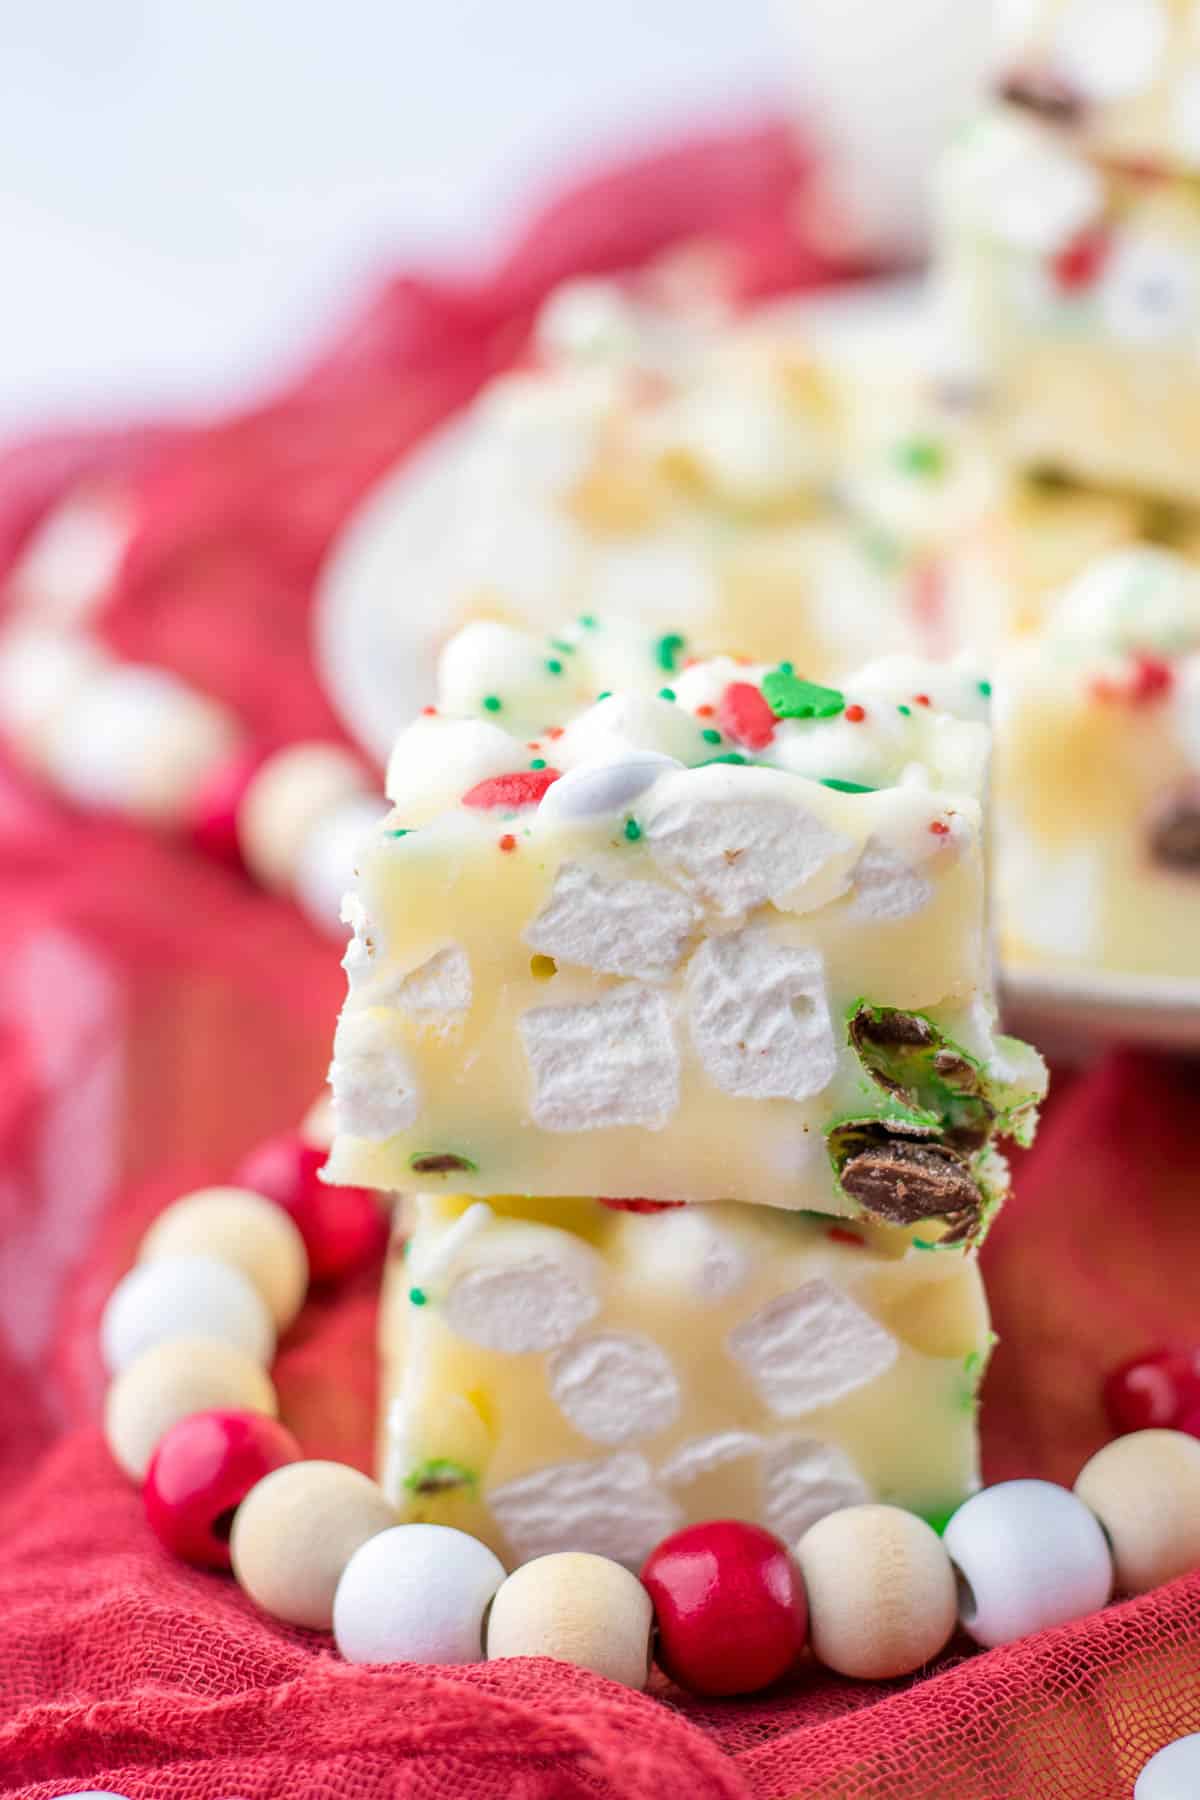 A stack of white chocolate rocky road on a red cloth.